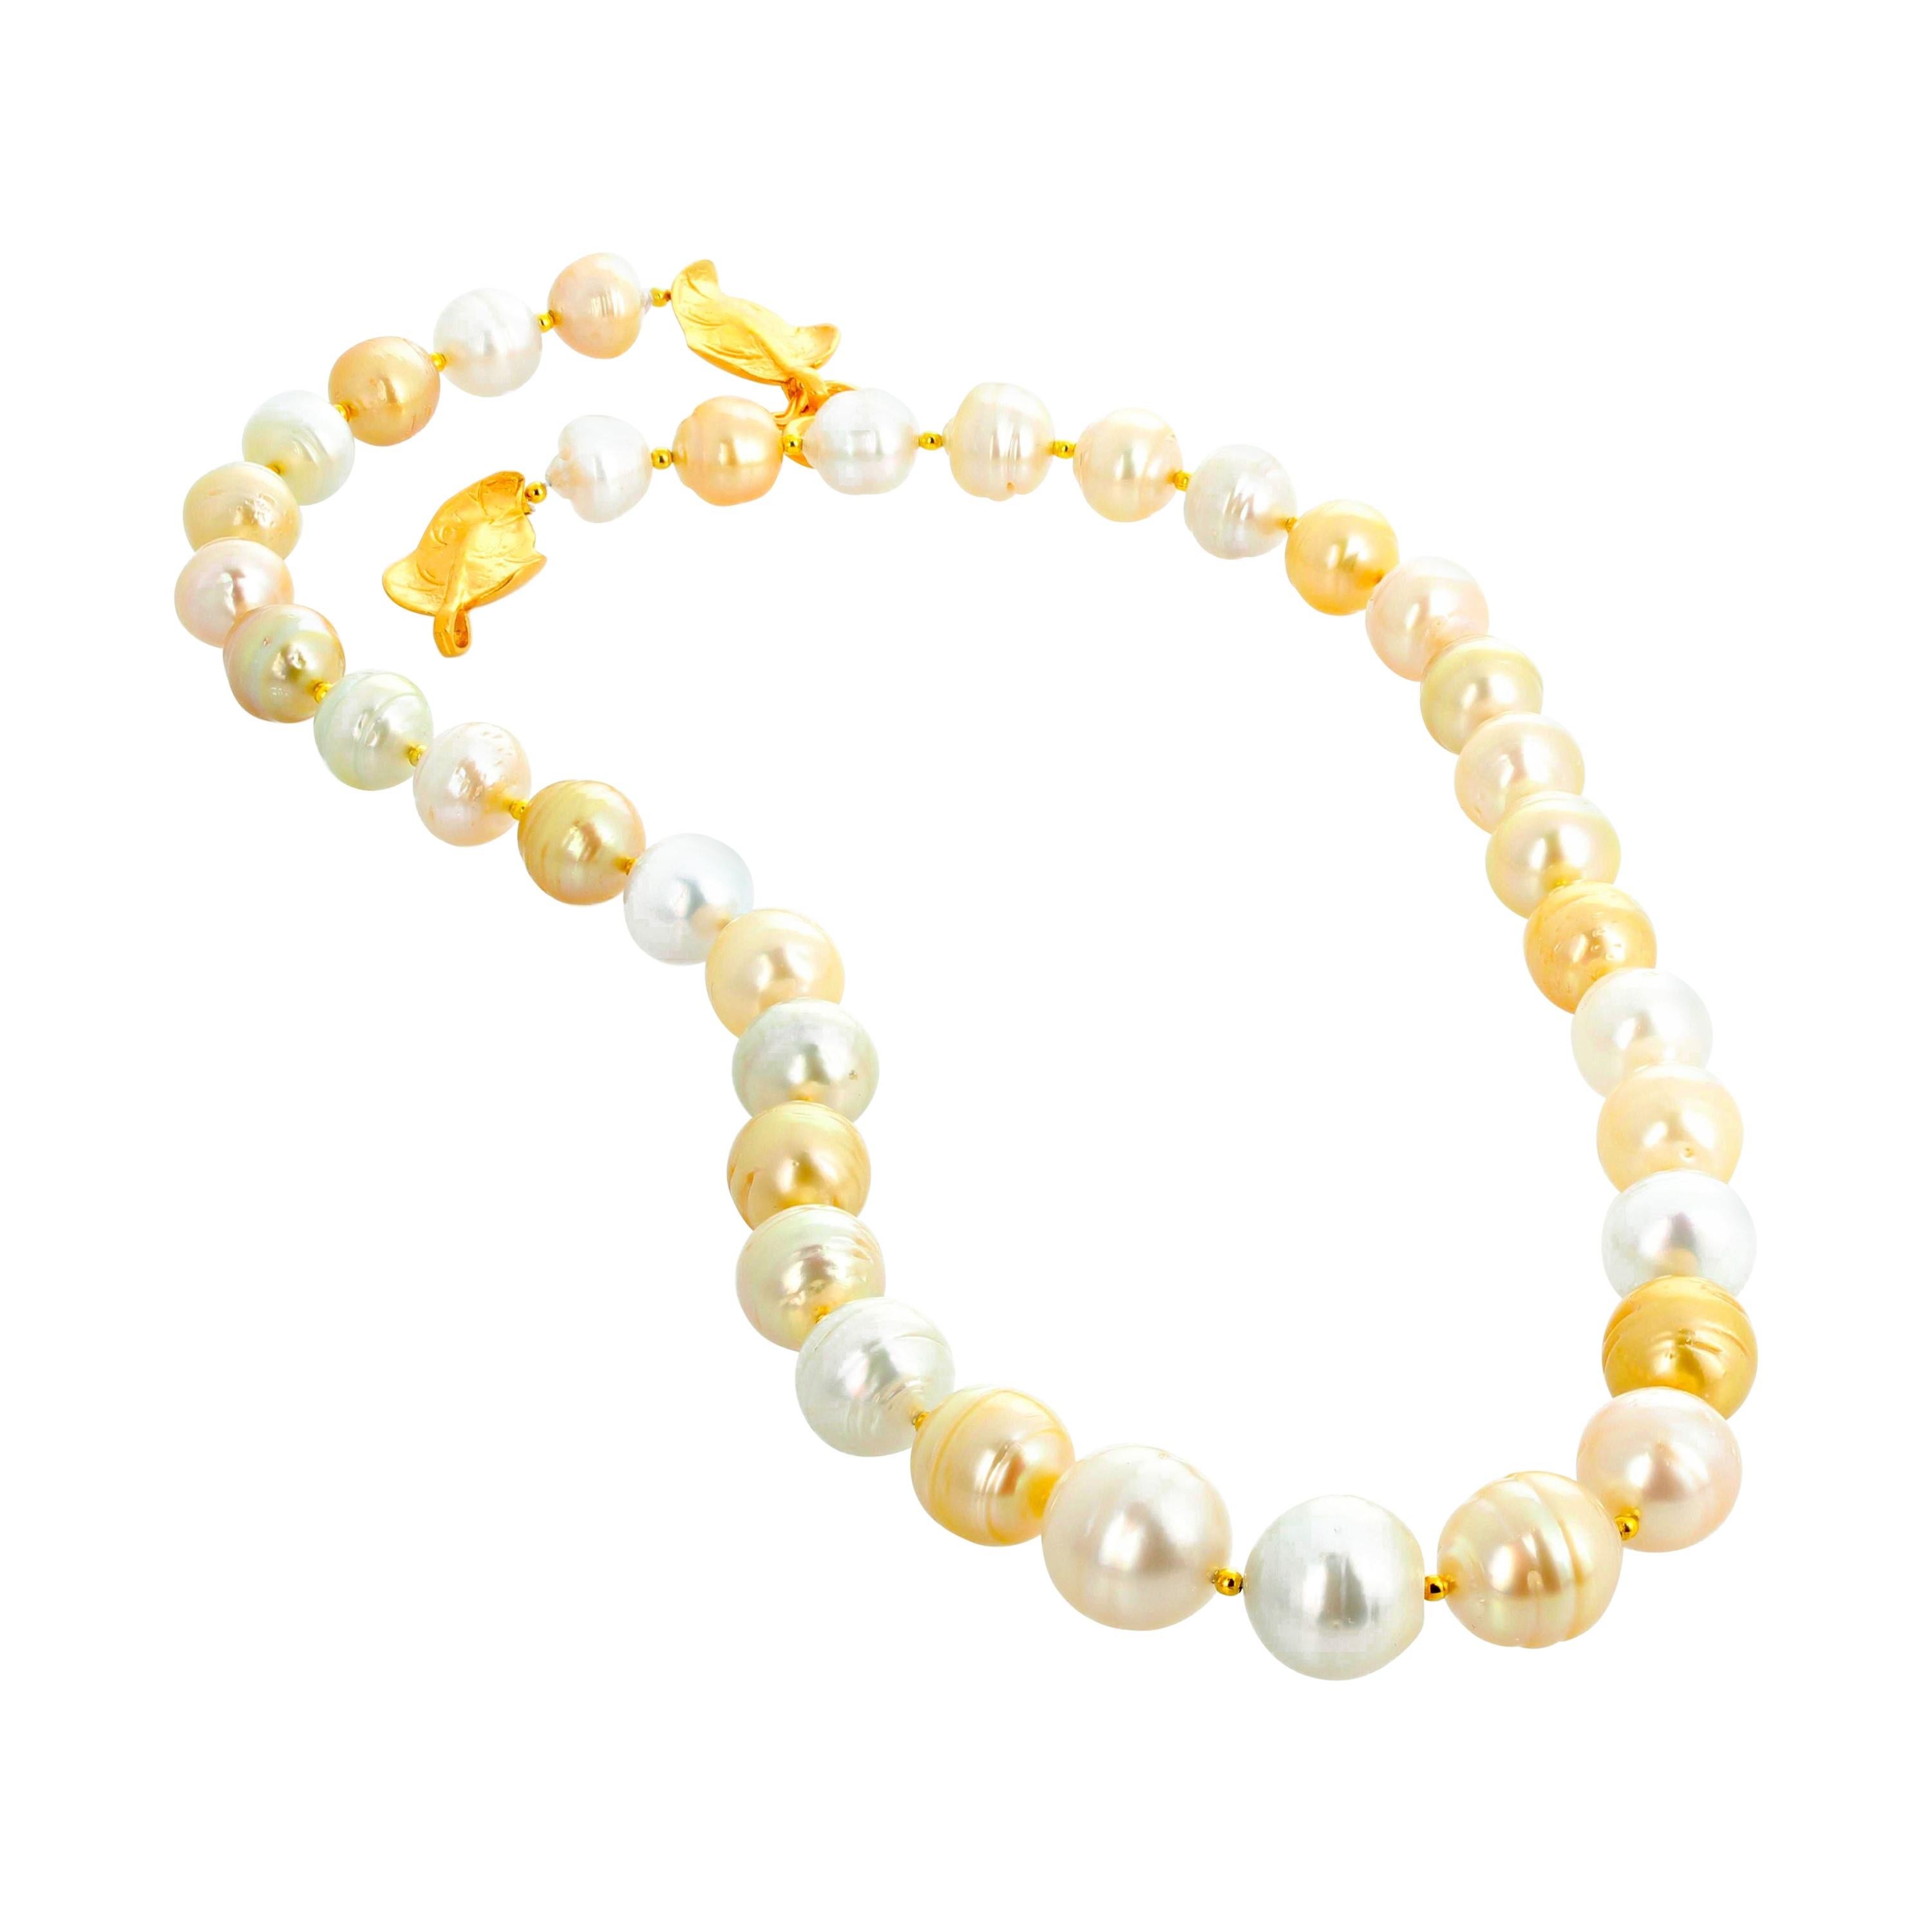 Beautiful South Sea Fresh Water Goldy and White and Creamy natural Cultured Pearls with Vermeil (gold plated silver) easy to us hook clasp.  The pearls are graduated in size with the largest pearl 14 mm and the smallest 10 mm and it is 23 inches